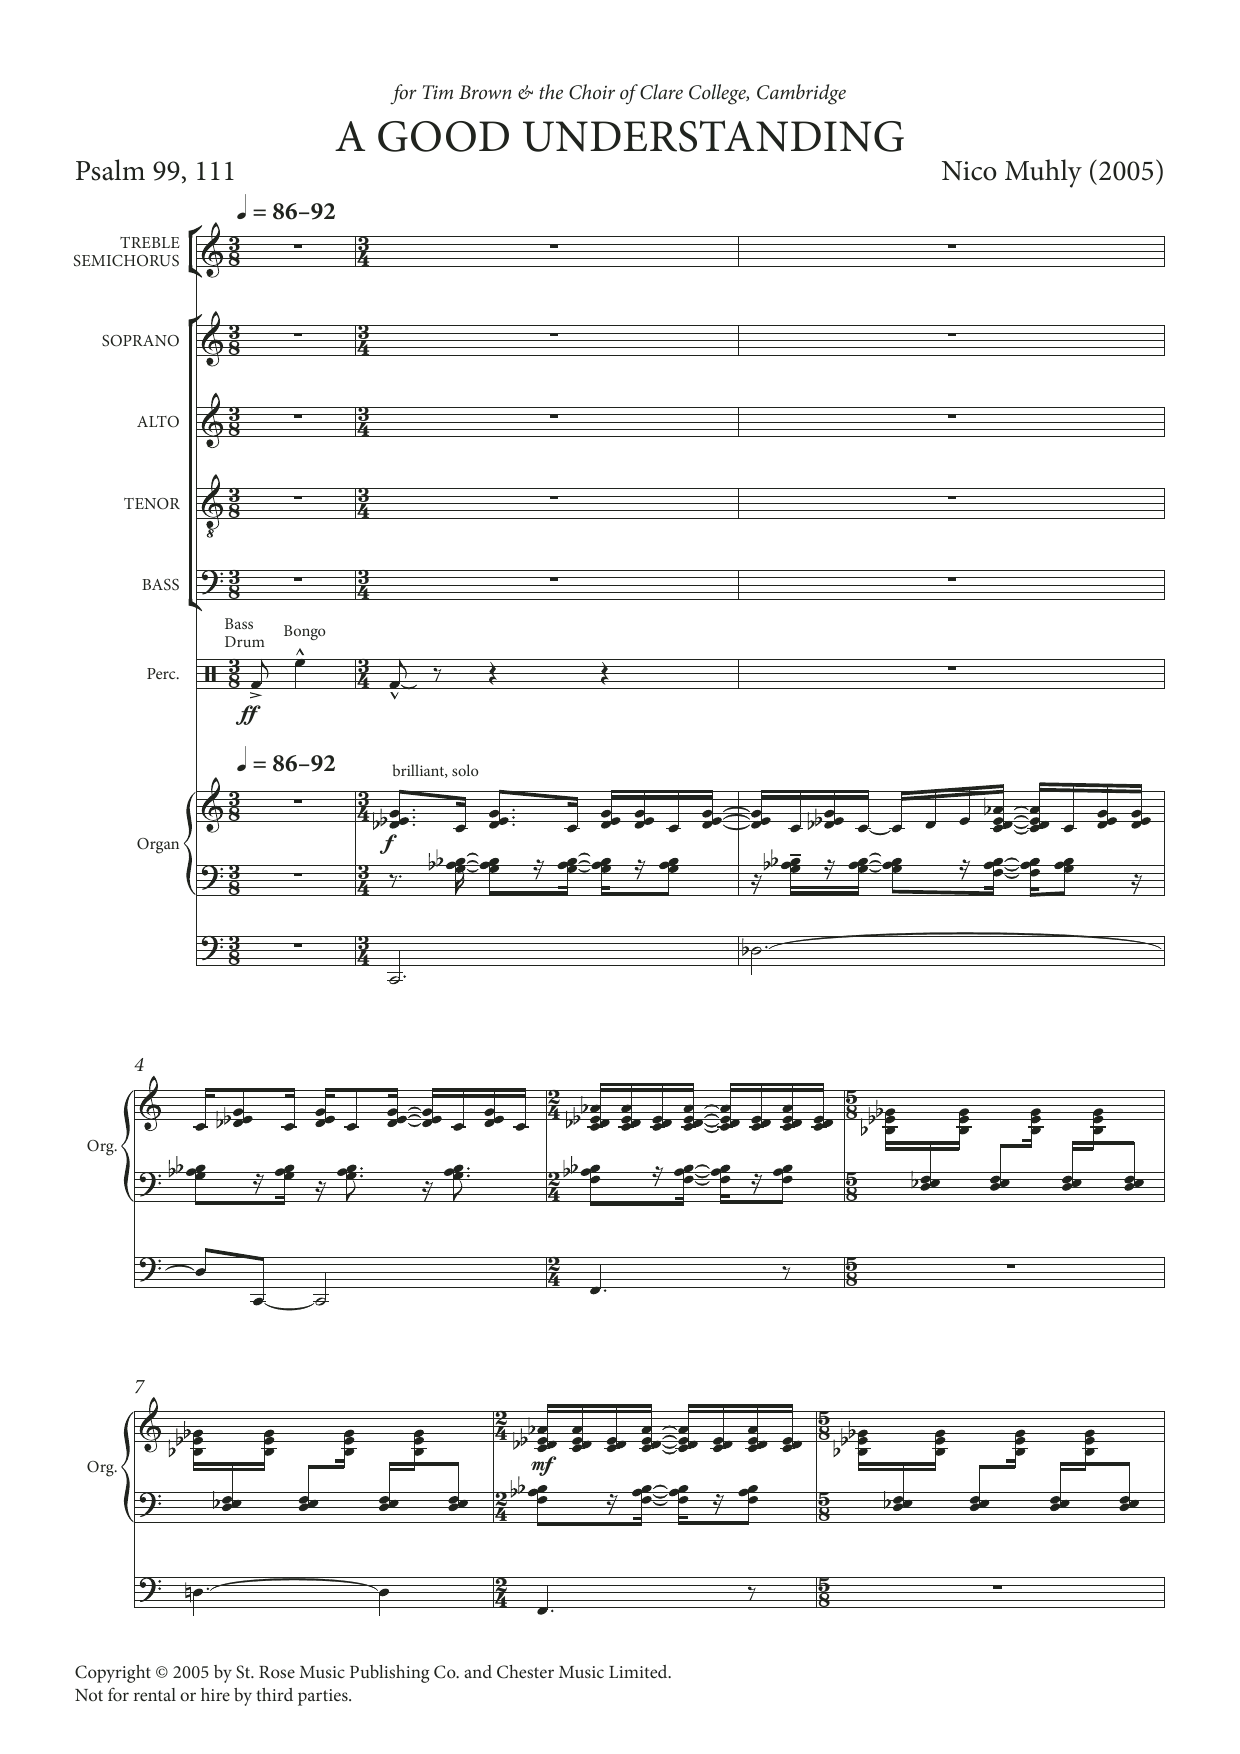 Download Nico Muhly A Good Understanding Sheet Music